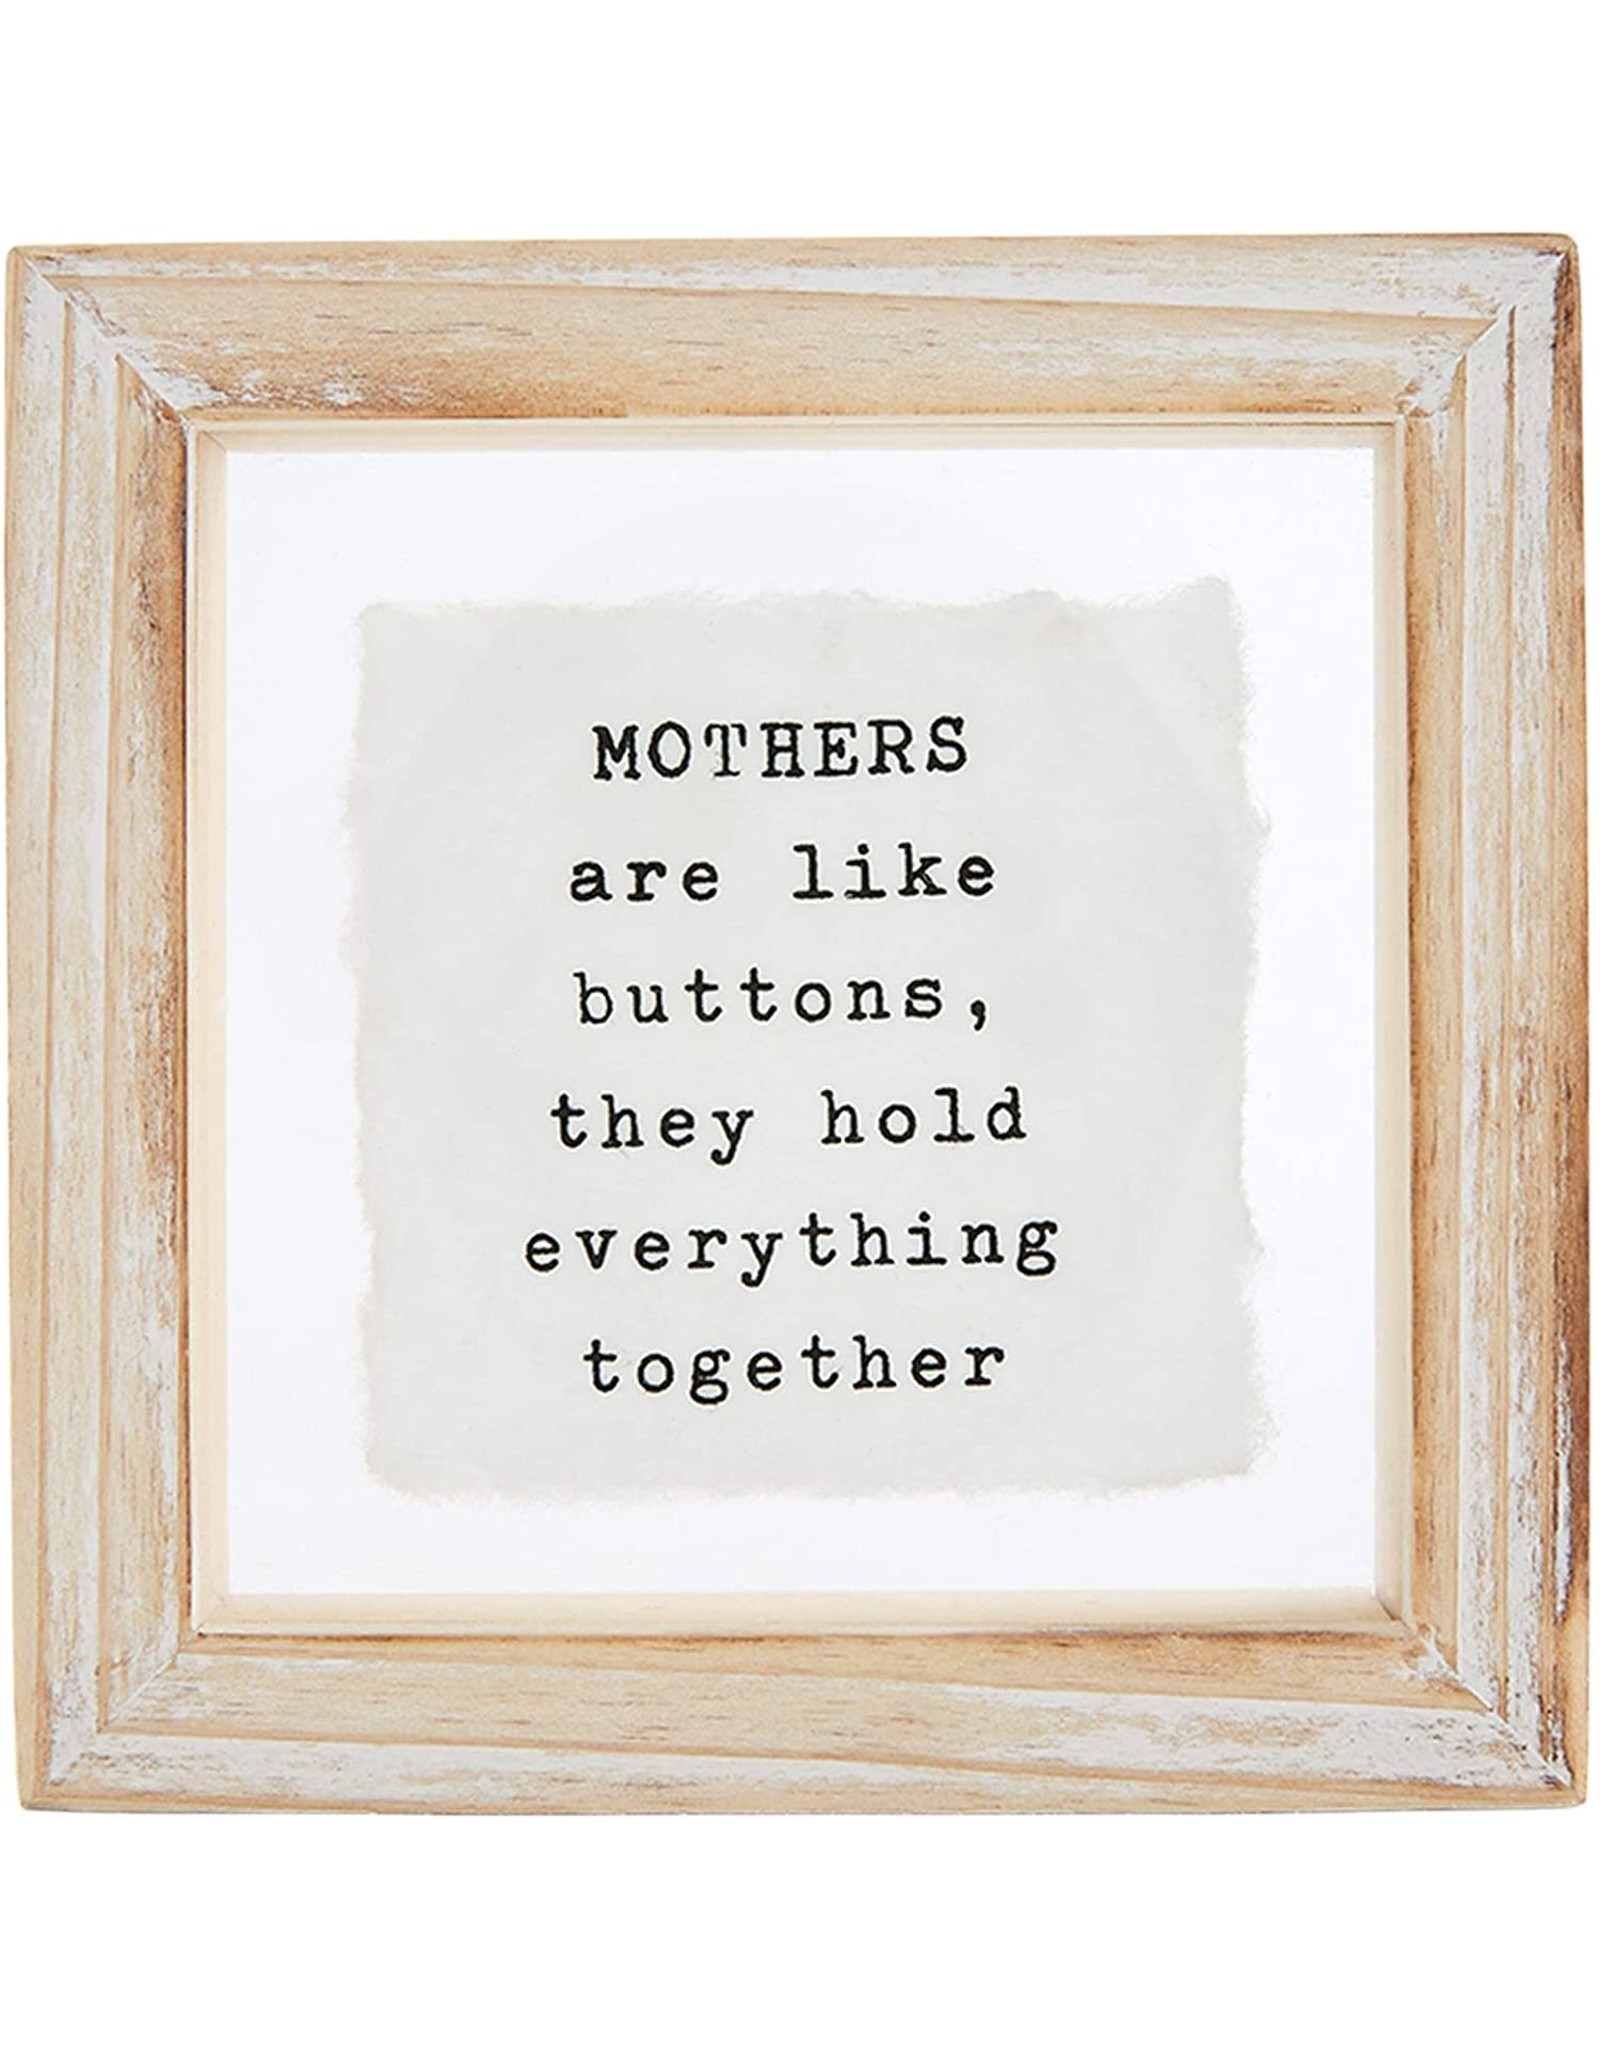 Mud Pie Pressed Glass Mothers Plaque With Sentiment